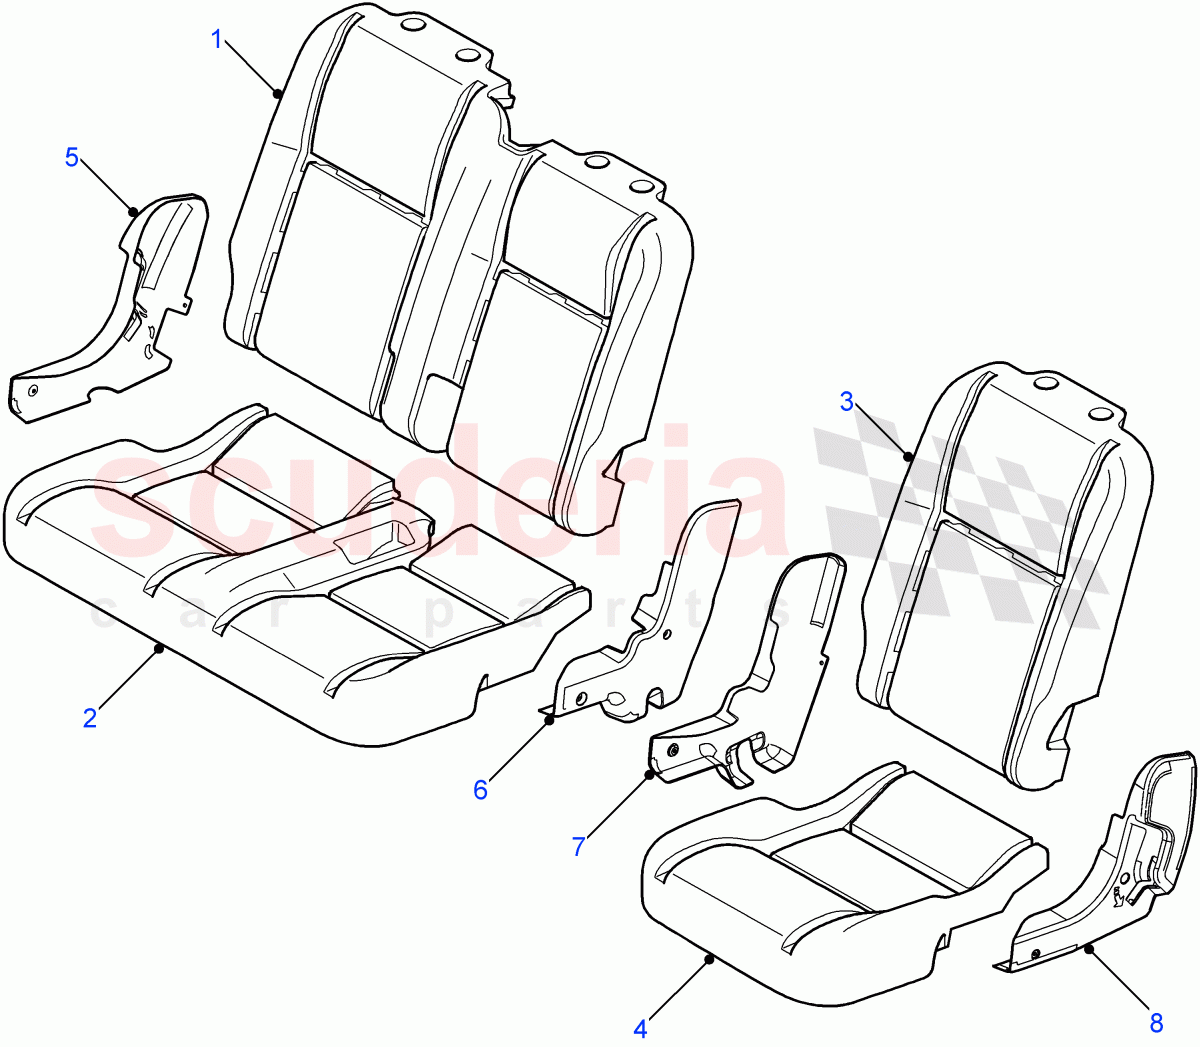 Rear Seat Pads/Valances & Heating(Crew Cab Pick Up,110" Wheelbase,Chassis Crew Cab,130" Wheelbase,Station Wagon Utility - 5 Door,Station Wagon - 5 Door,Crew Cab HCPU)((V)FROM7A000001) of Land Rover Land Rover Defender (2007-2016)